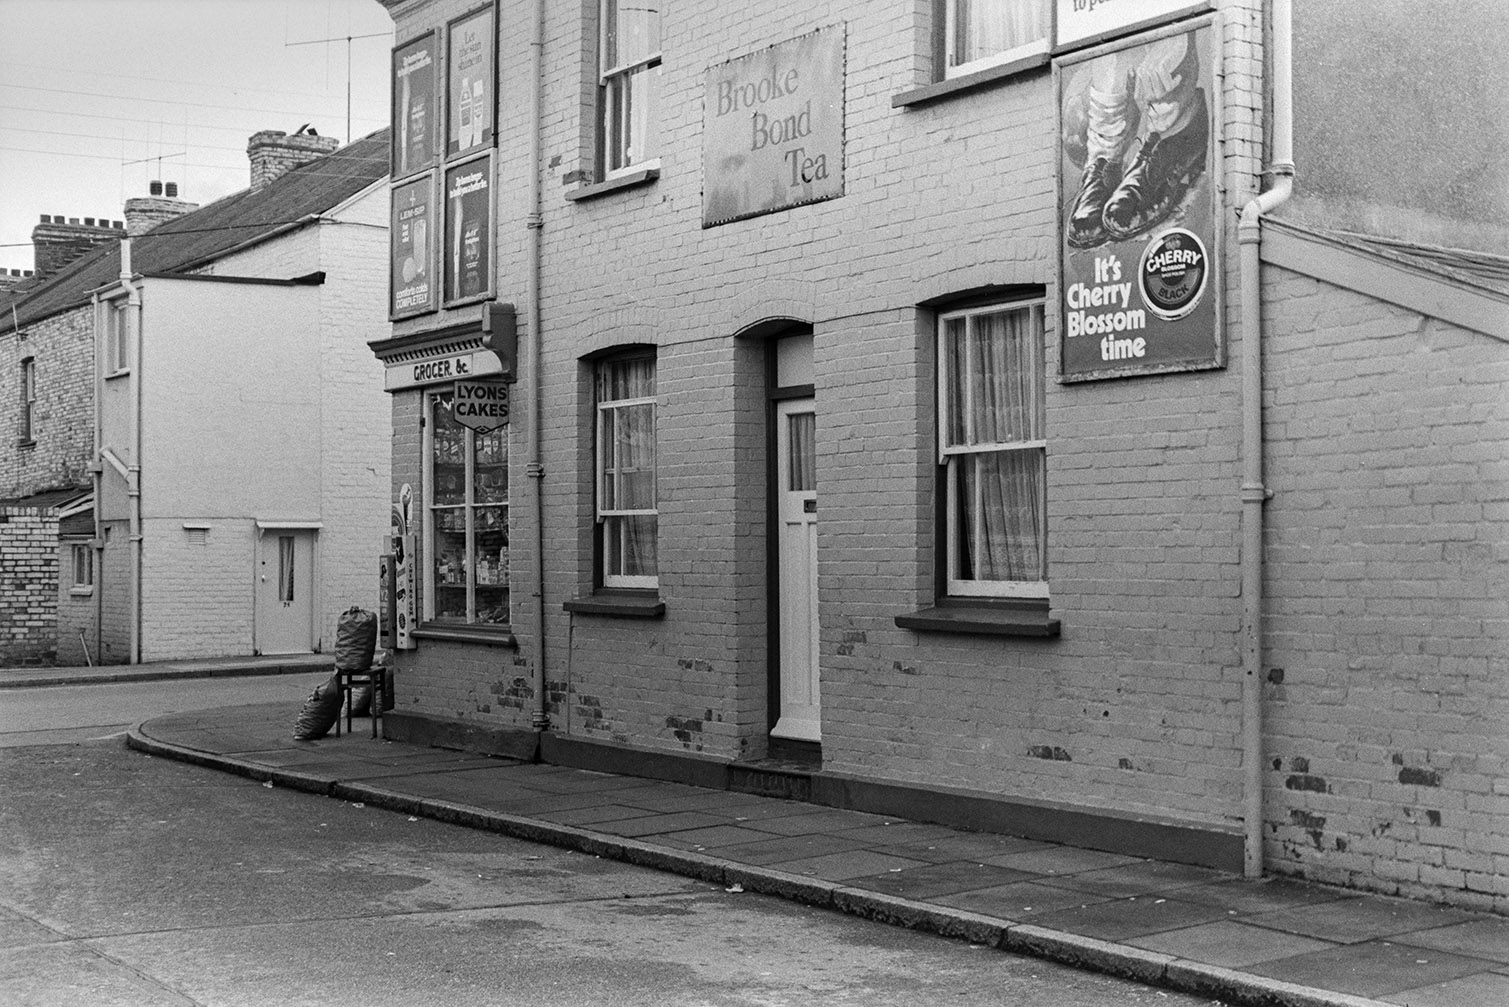 Advertising boards fixed to a Grocer's shop and a house on a street corner in Barnstaple. Adverts include one for cherry blossom shoe polish and Brooke Bond Tea.